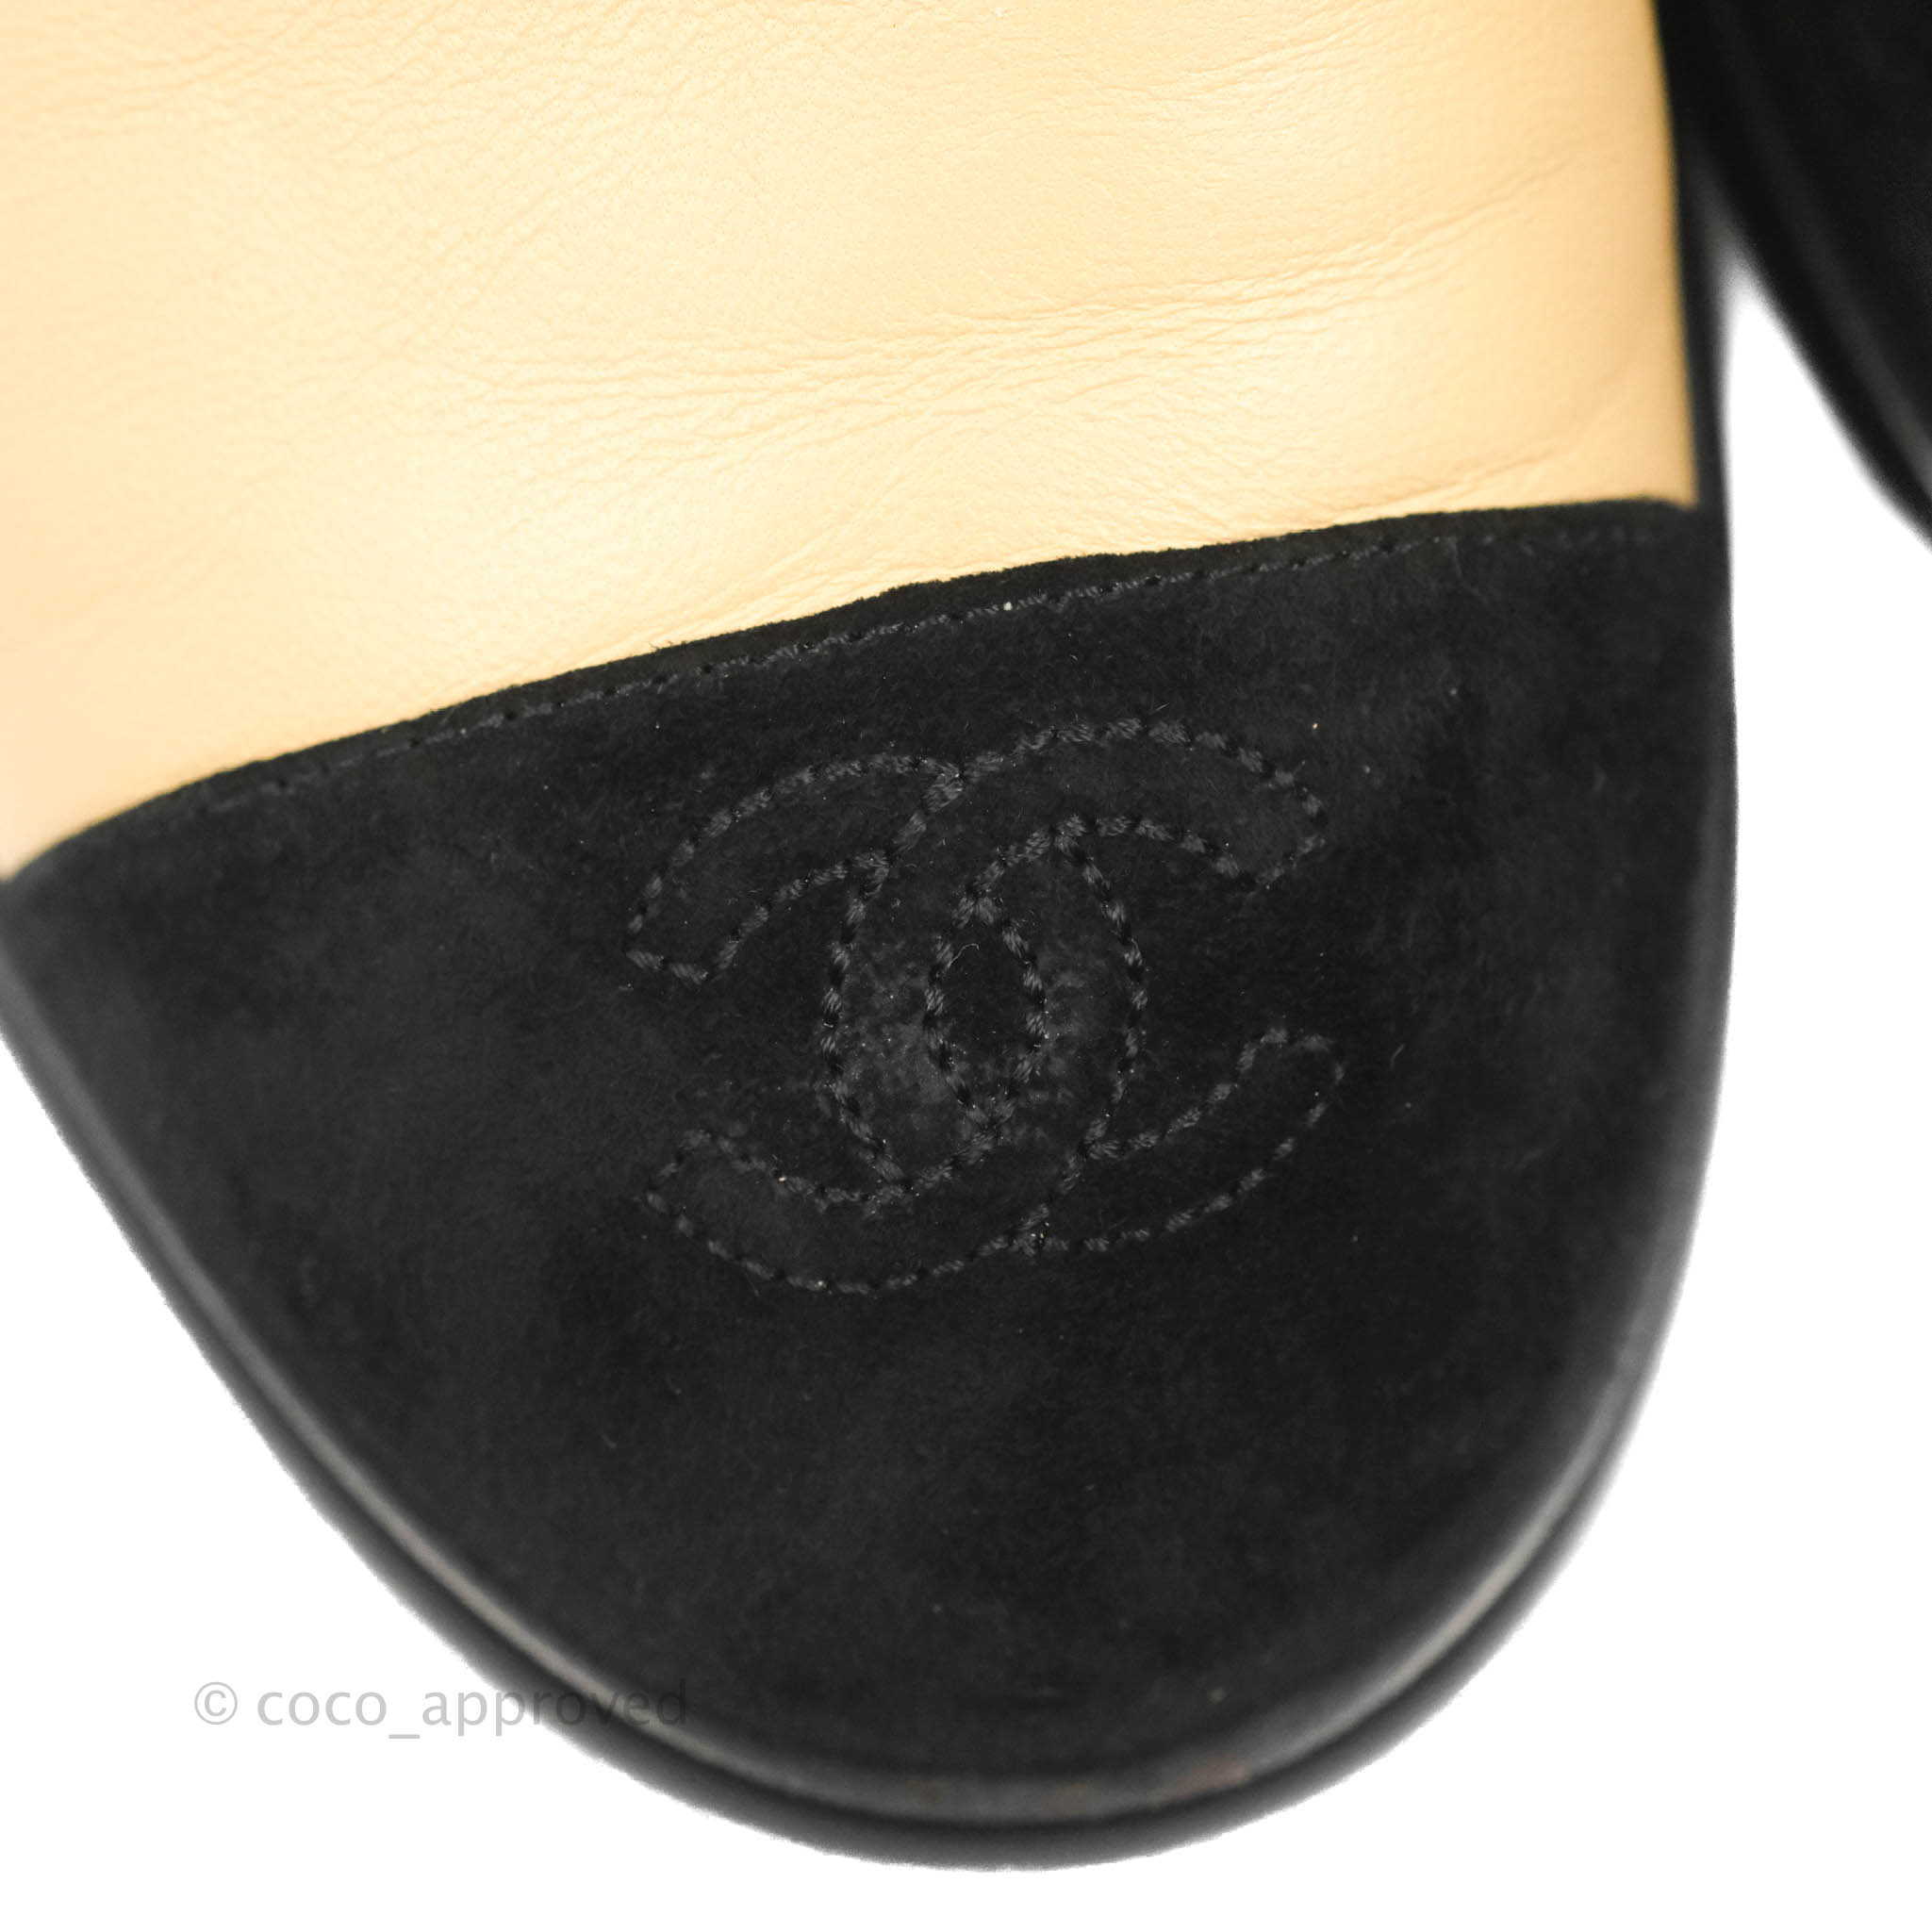 Ballerina shoes by Chanel. - Bukowskis